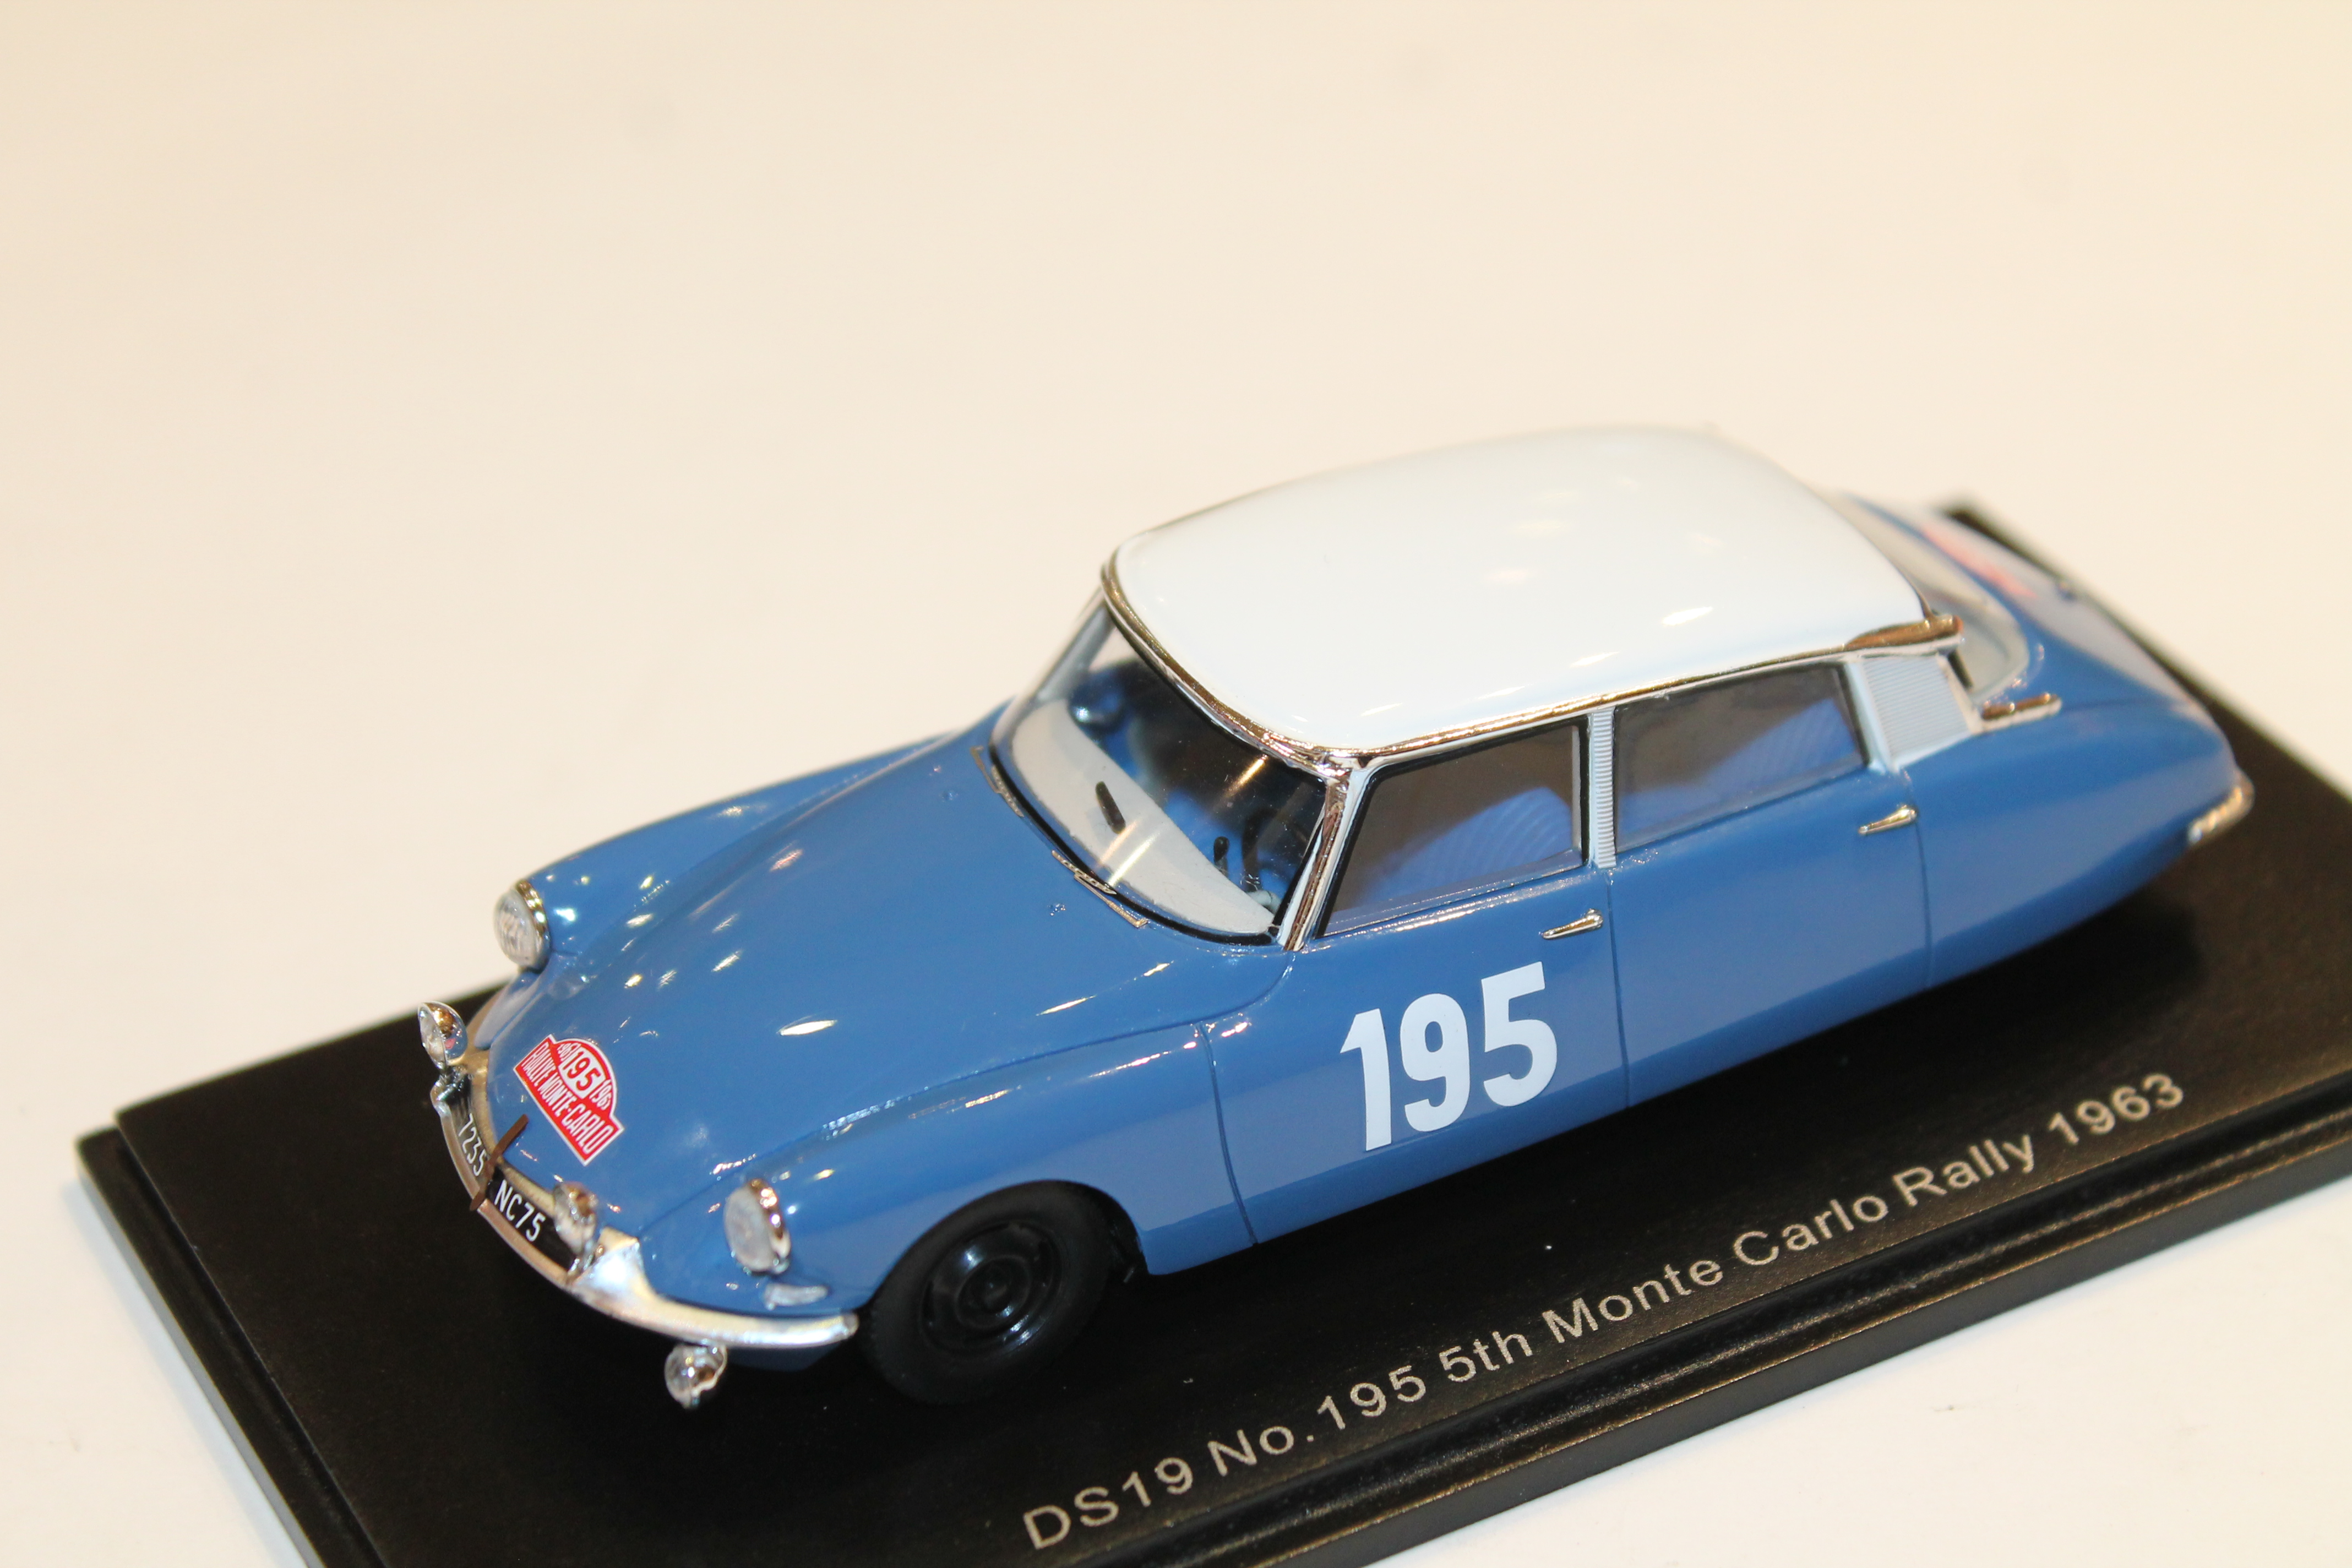 DS19 #195 5TH MONTE CARLO RALLY 1963 SPARK 1/43°